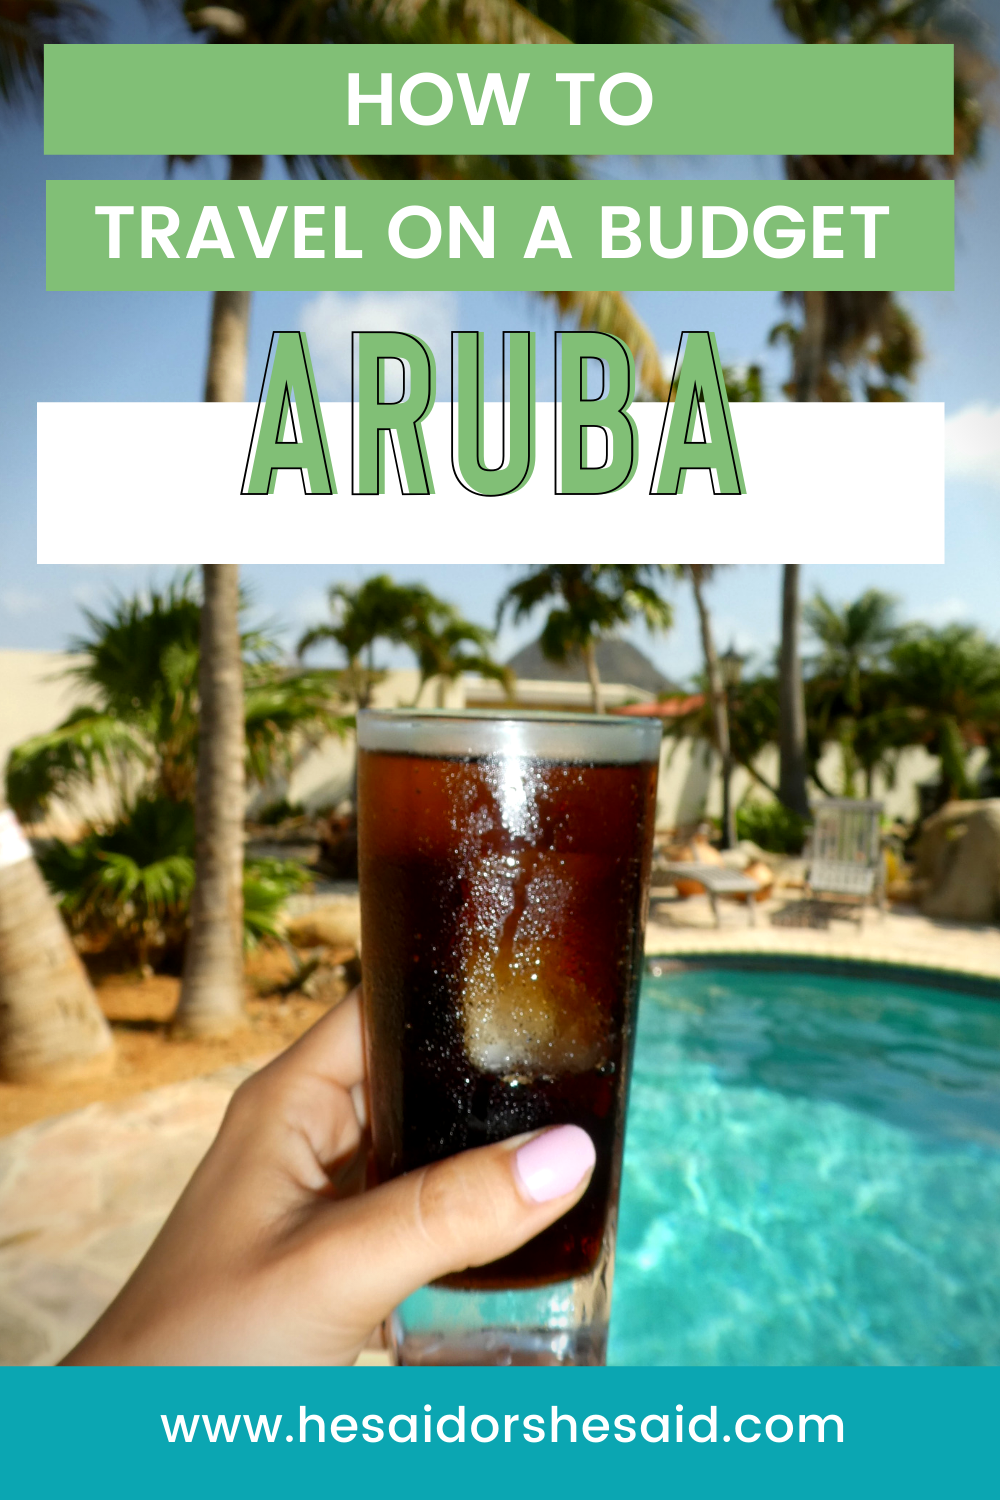 How to travel on a budget to Aruba by hesaidorshesaid